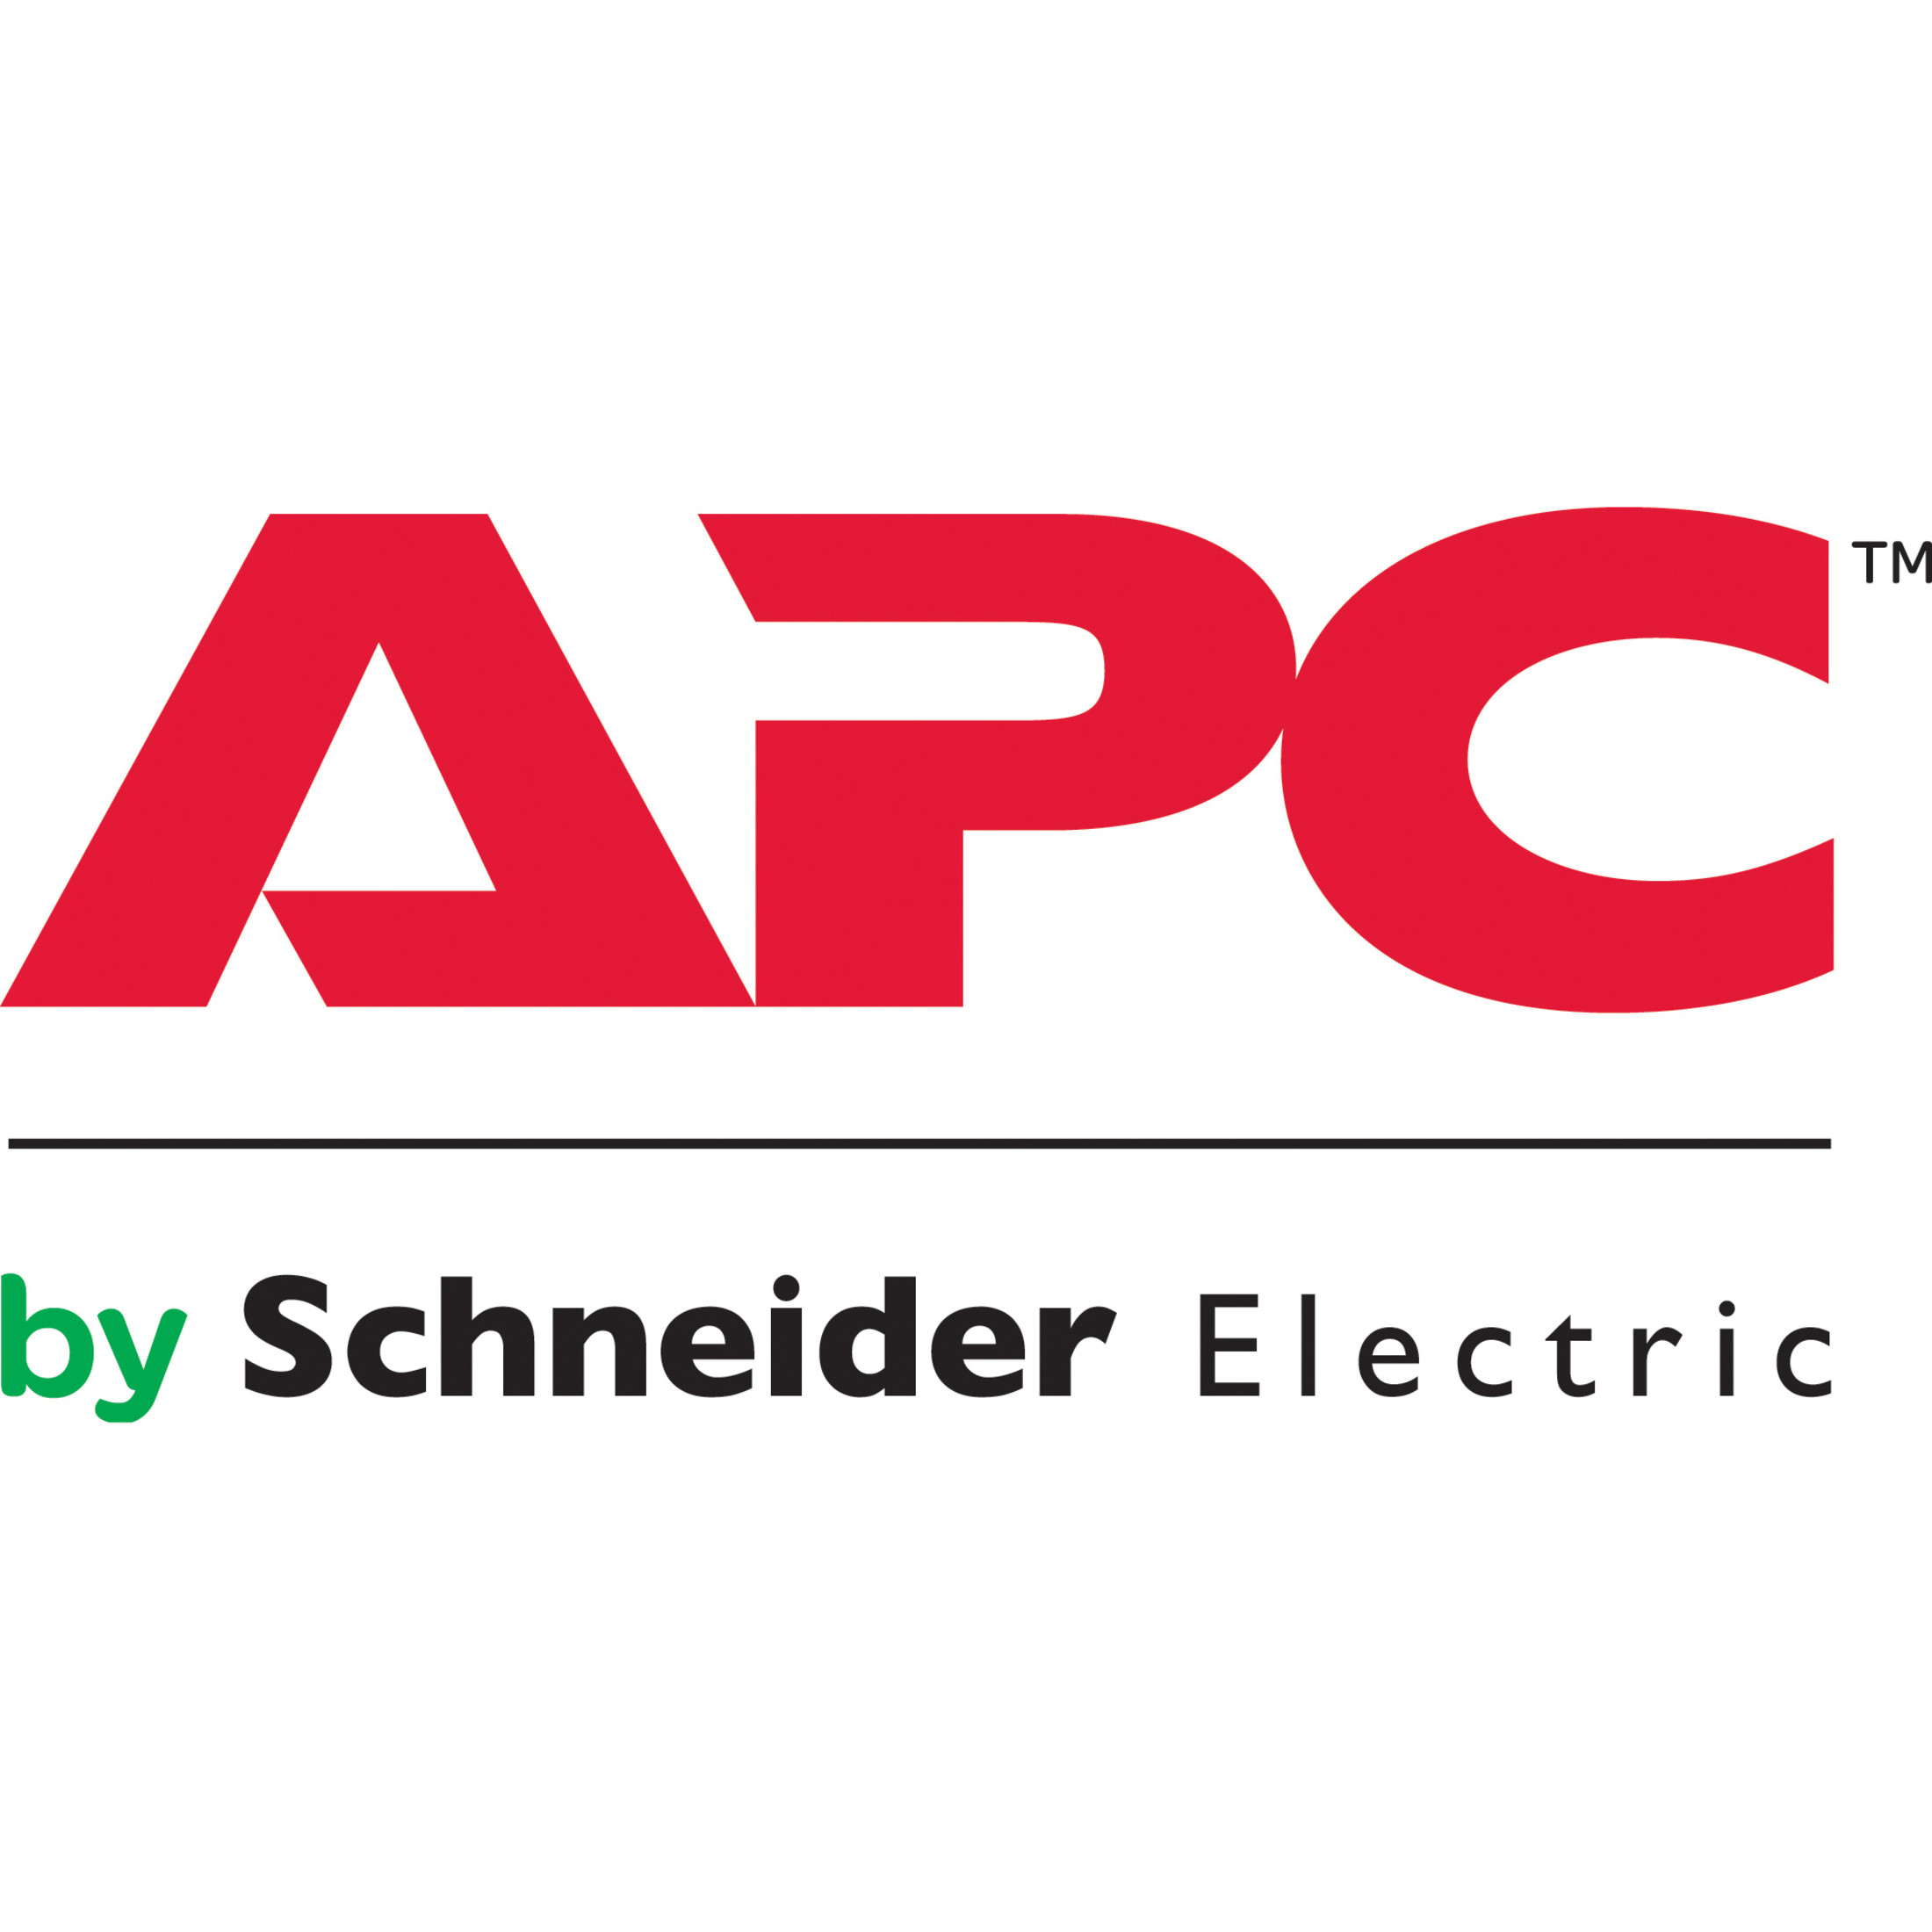 APC by Schneider Electric Advanced Operator Training for Symmetra PX250/500 On-siteTechnology Training CourseLecture, Lab WAOT-NX-00